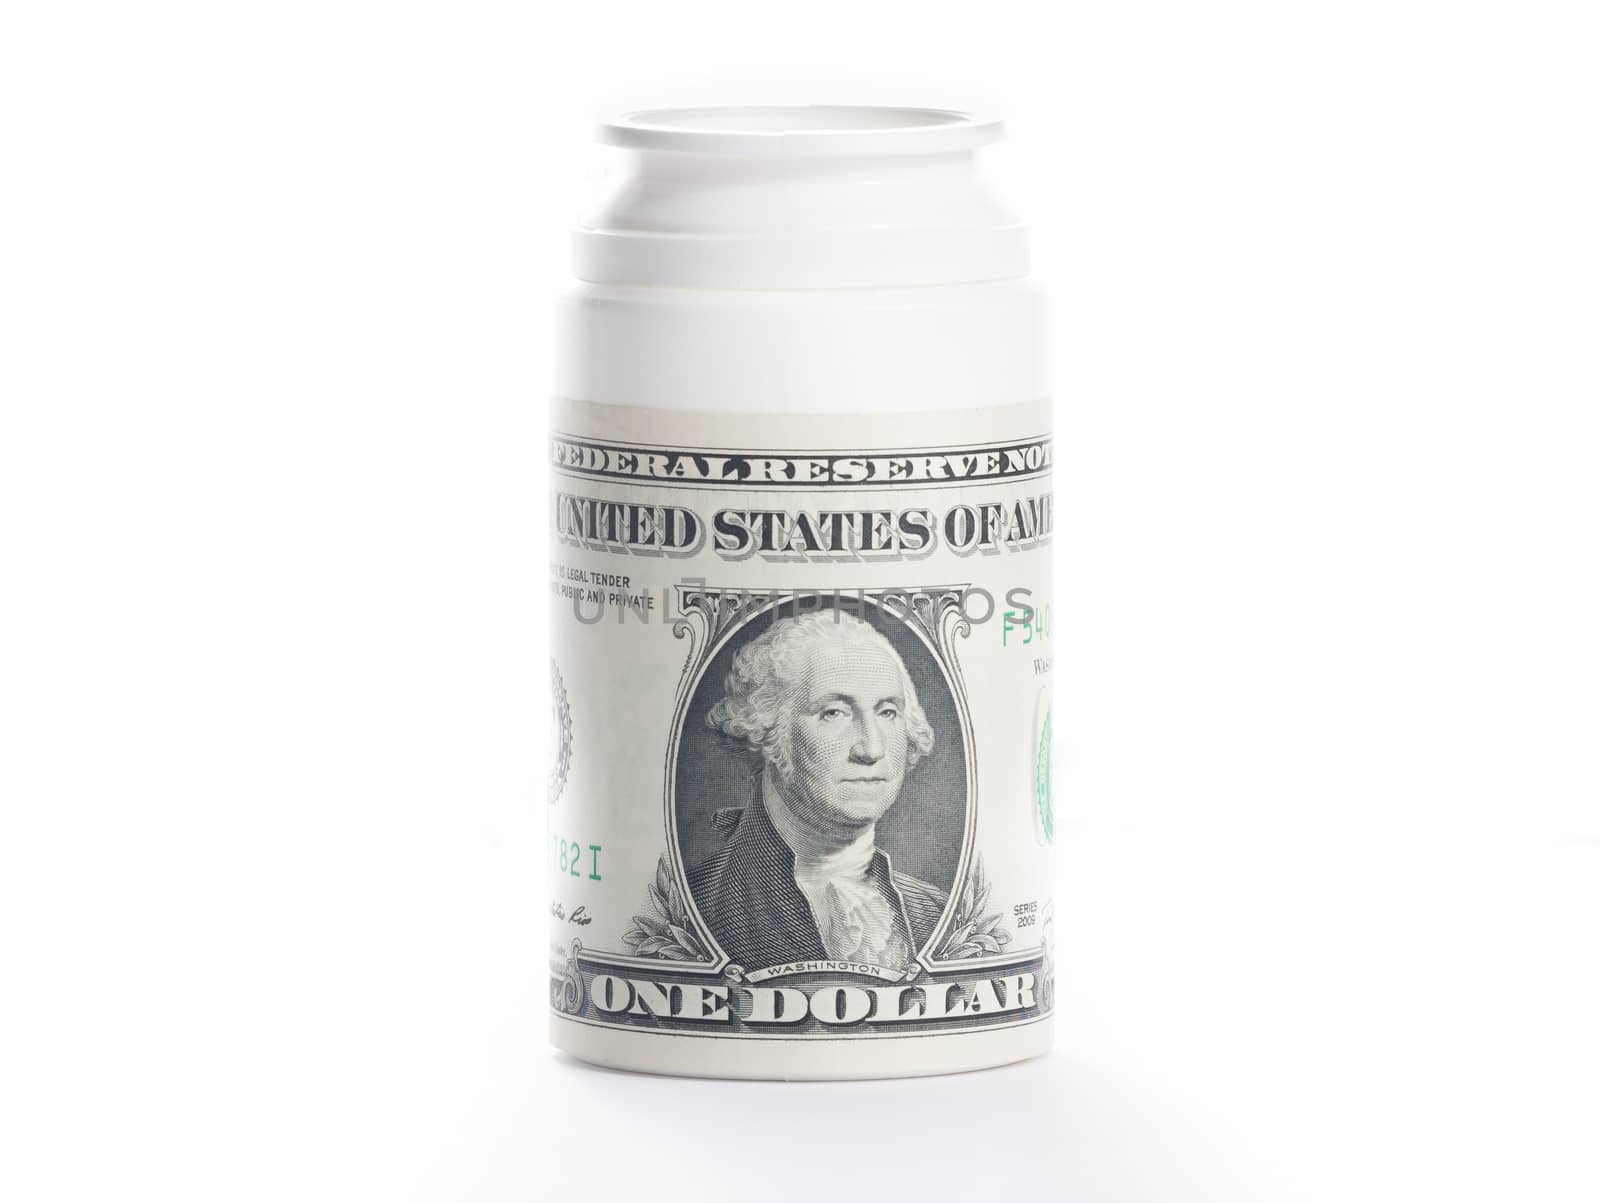 dollar on pills container under white background with space for text, cost of medical health care